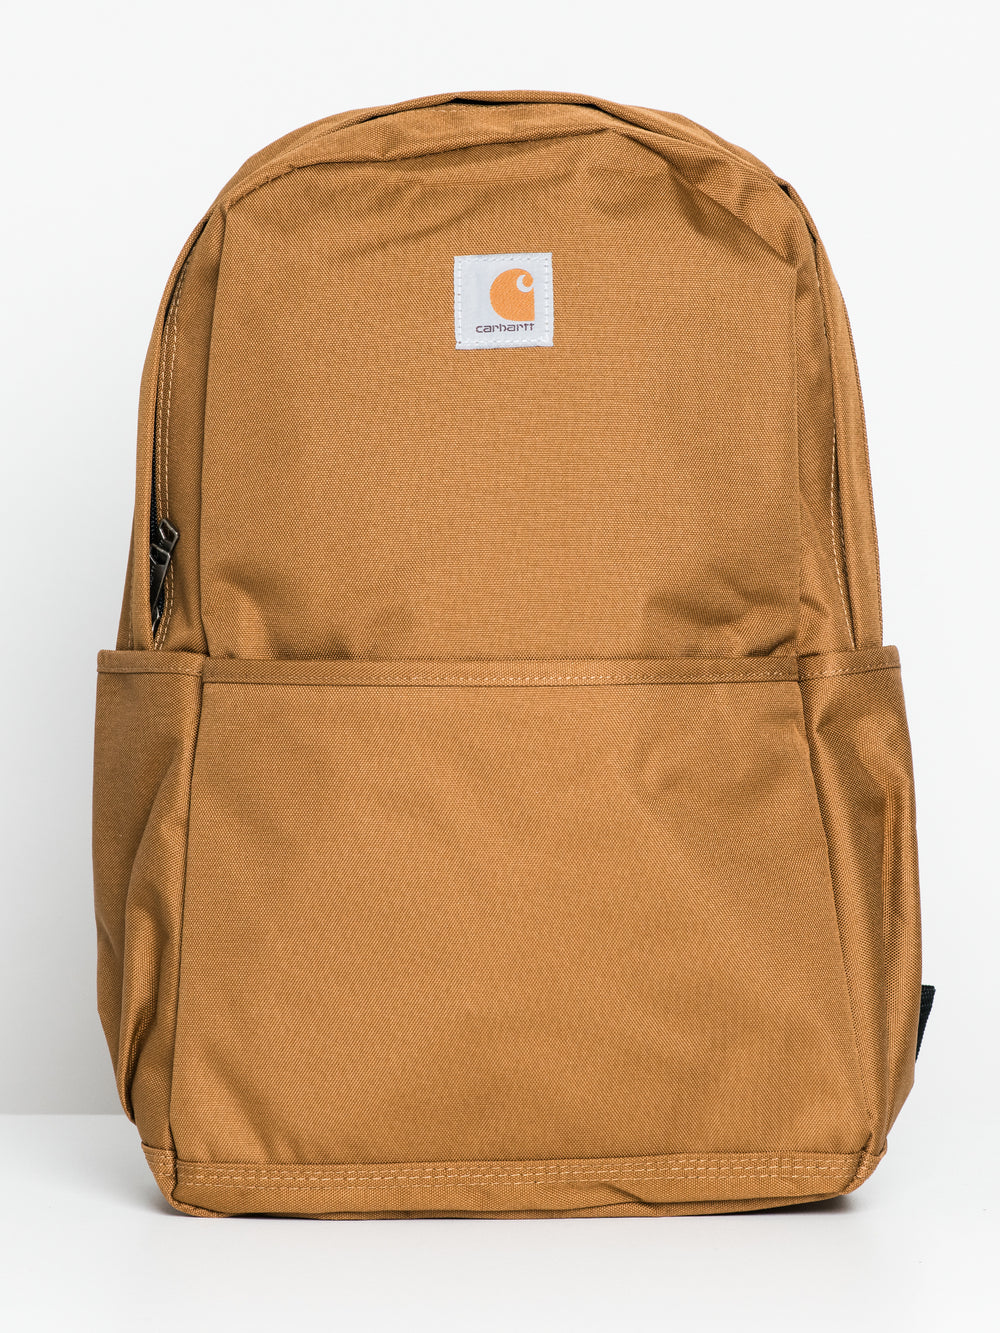 CARHARTT TRADE PLUS 21L BACKPACK - BROWN - CLEARANCE